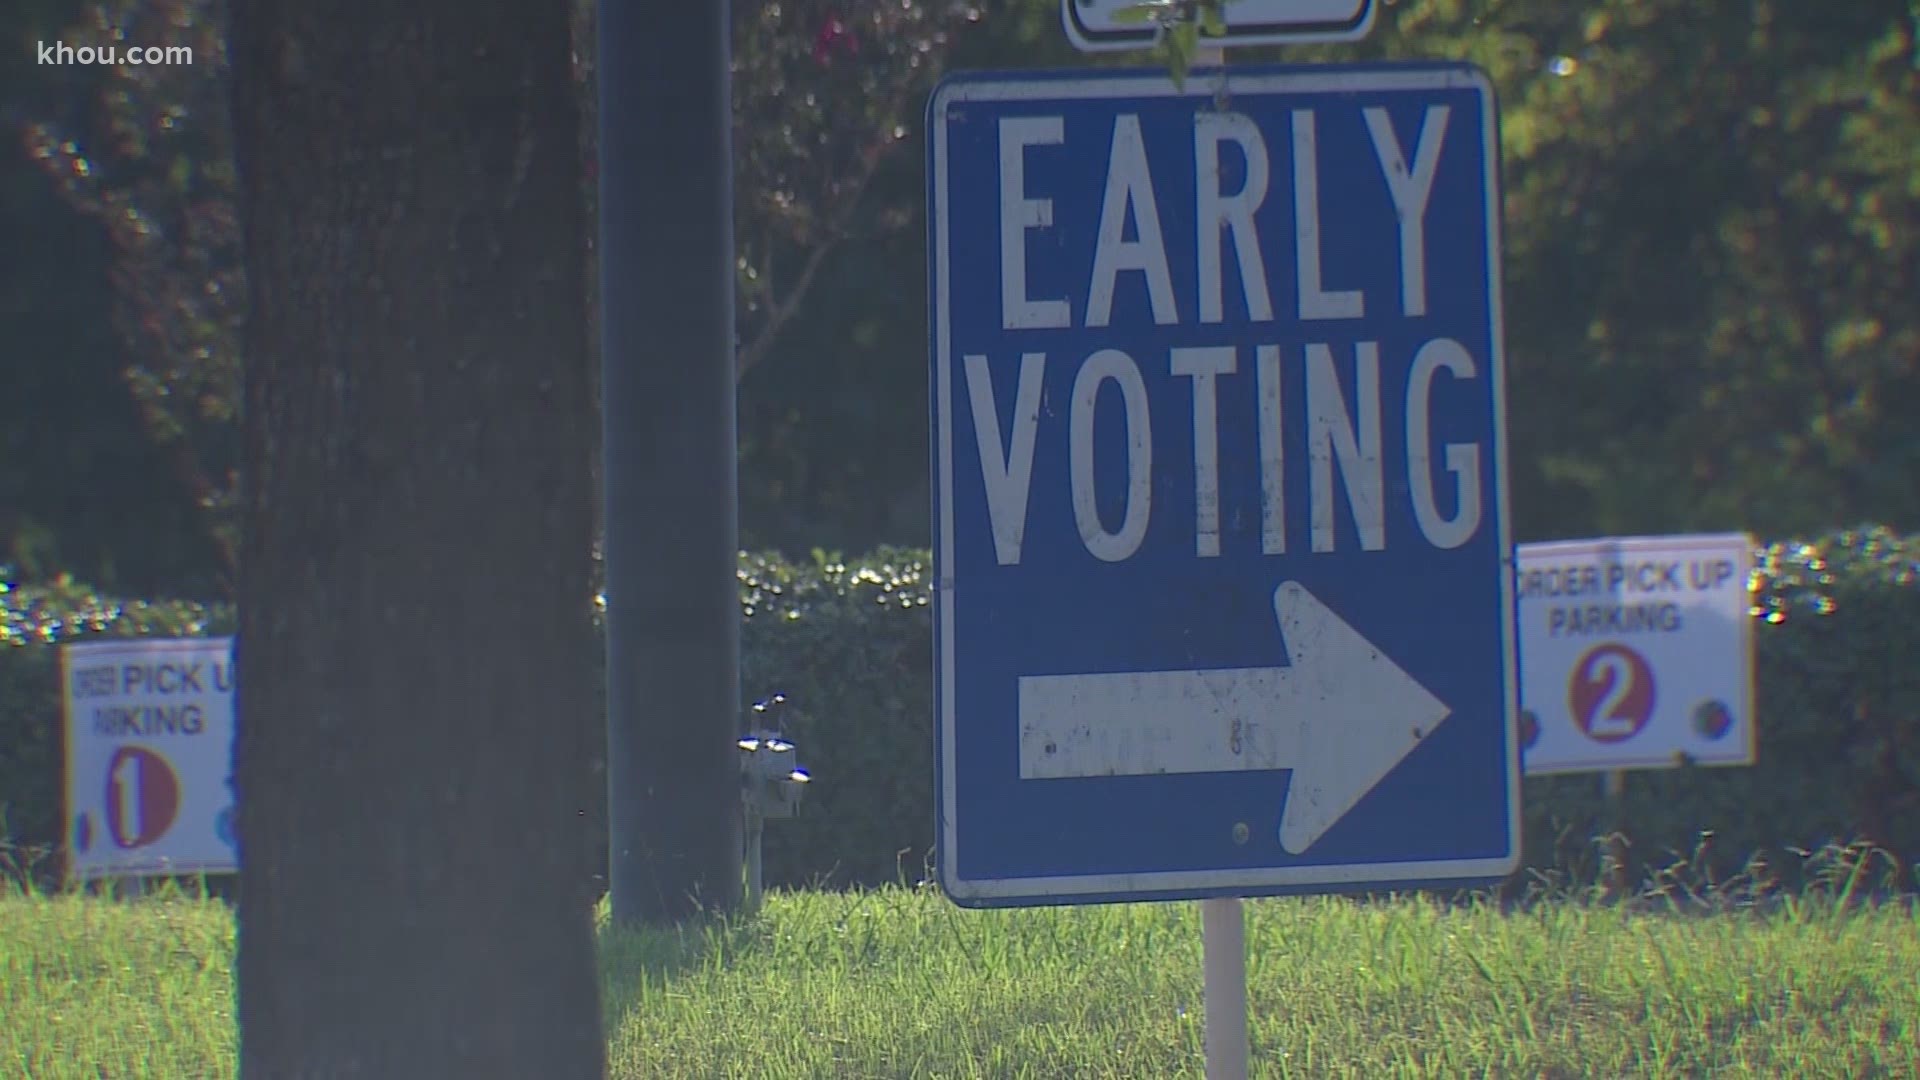 In Harris County, there are a historic number of polling places with COVID-19 precautions and an improved way to find information about wait times online.